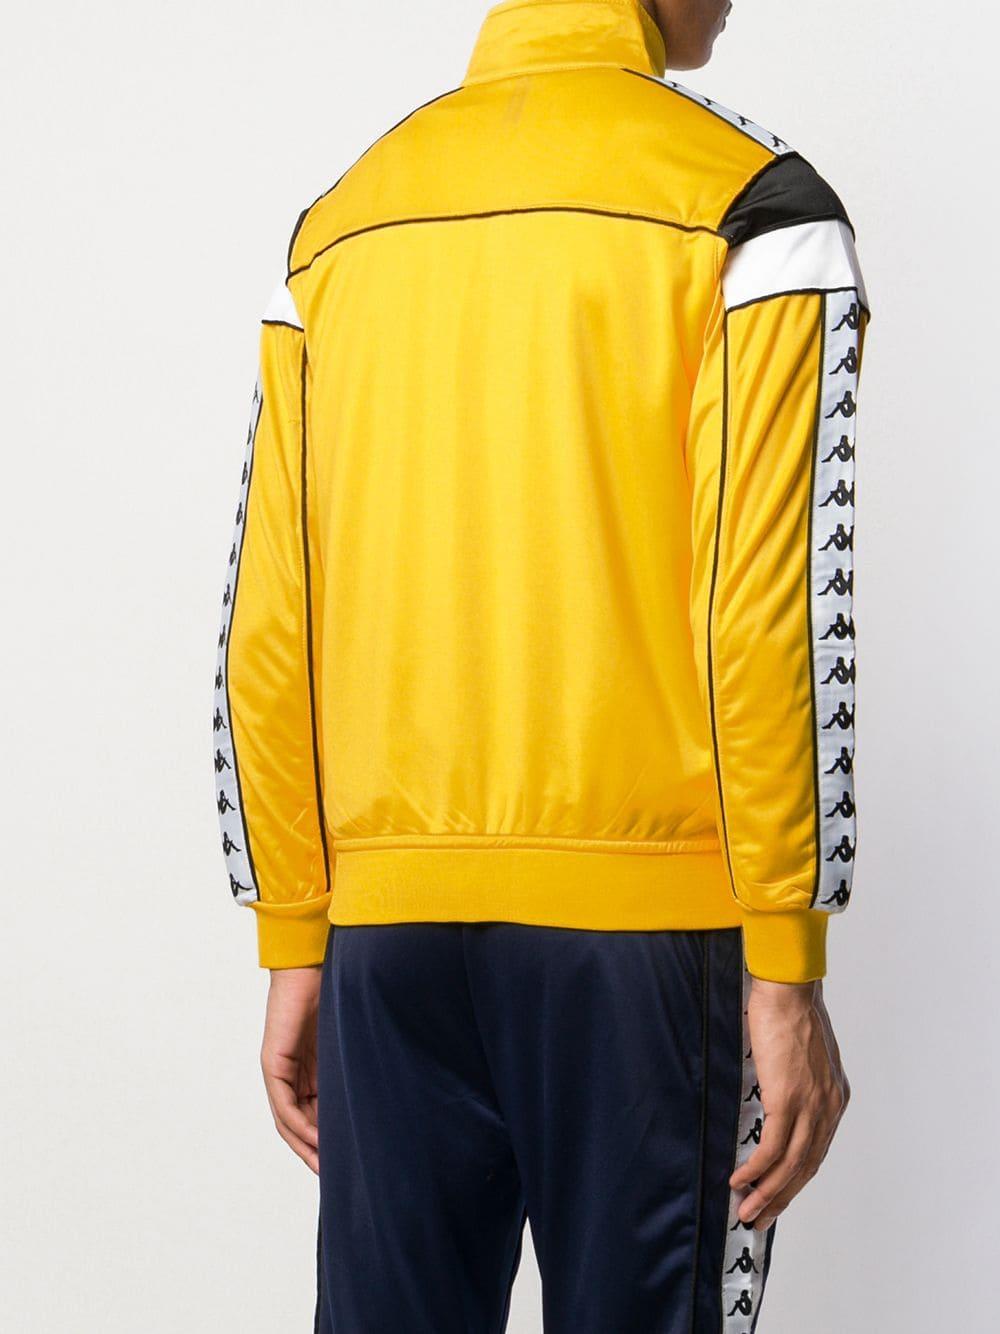 Kappa Colour Block Jacket in Yellow for Men - Lyst